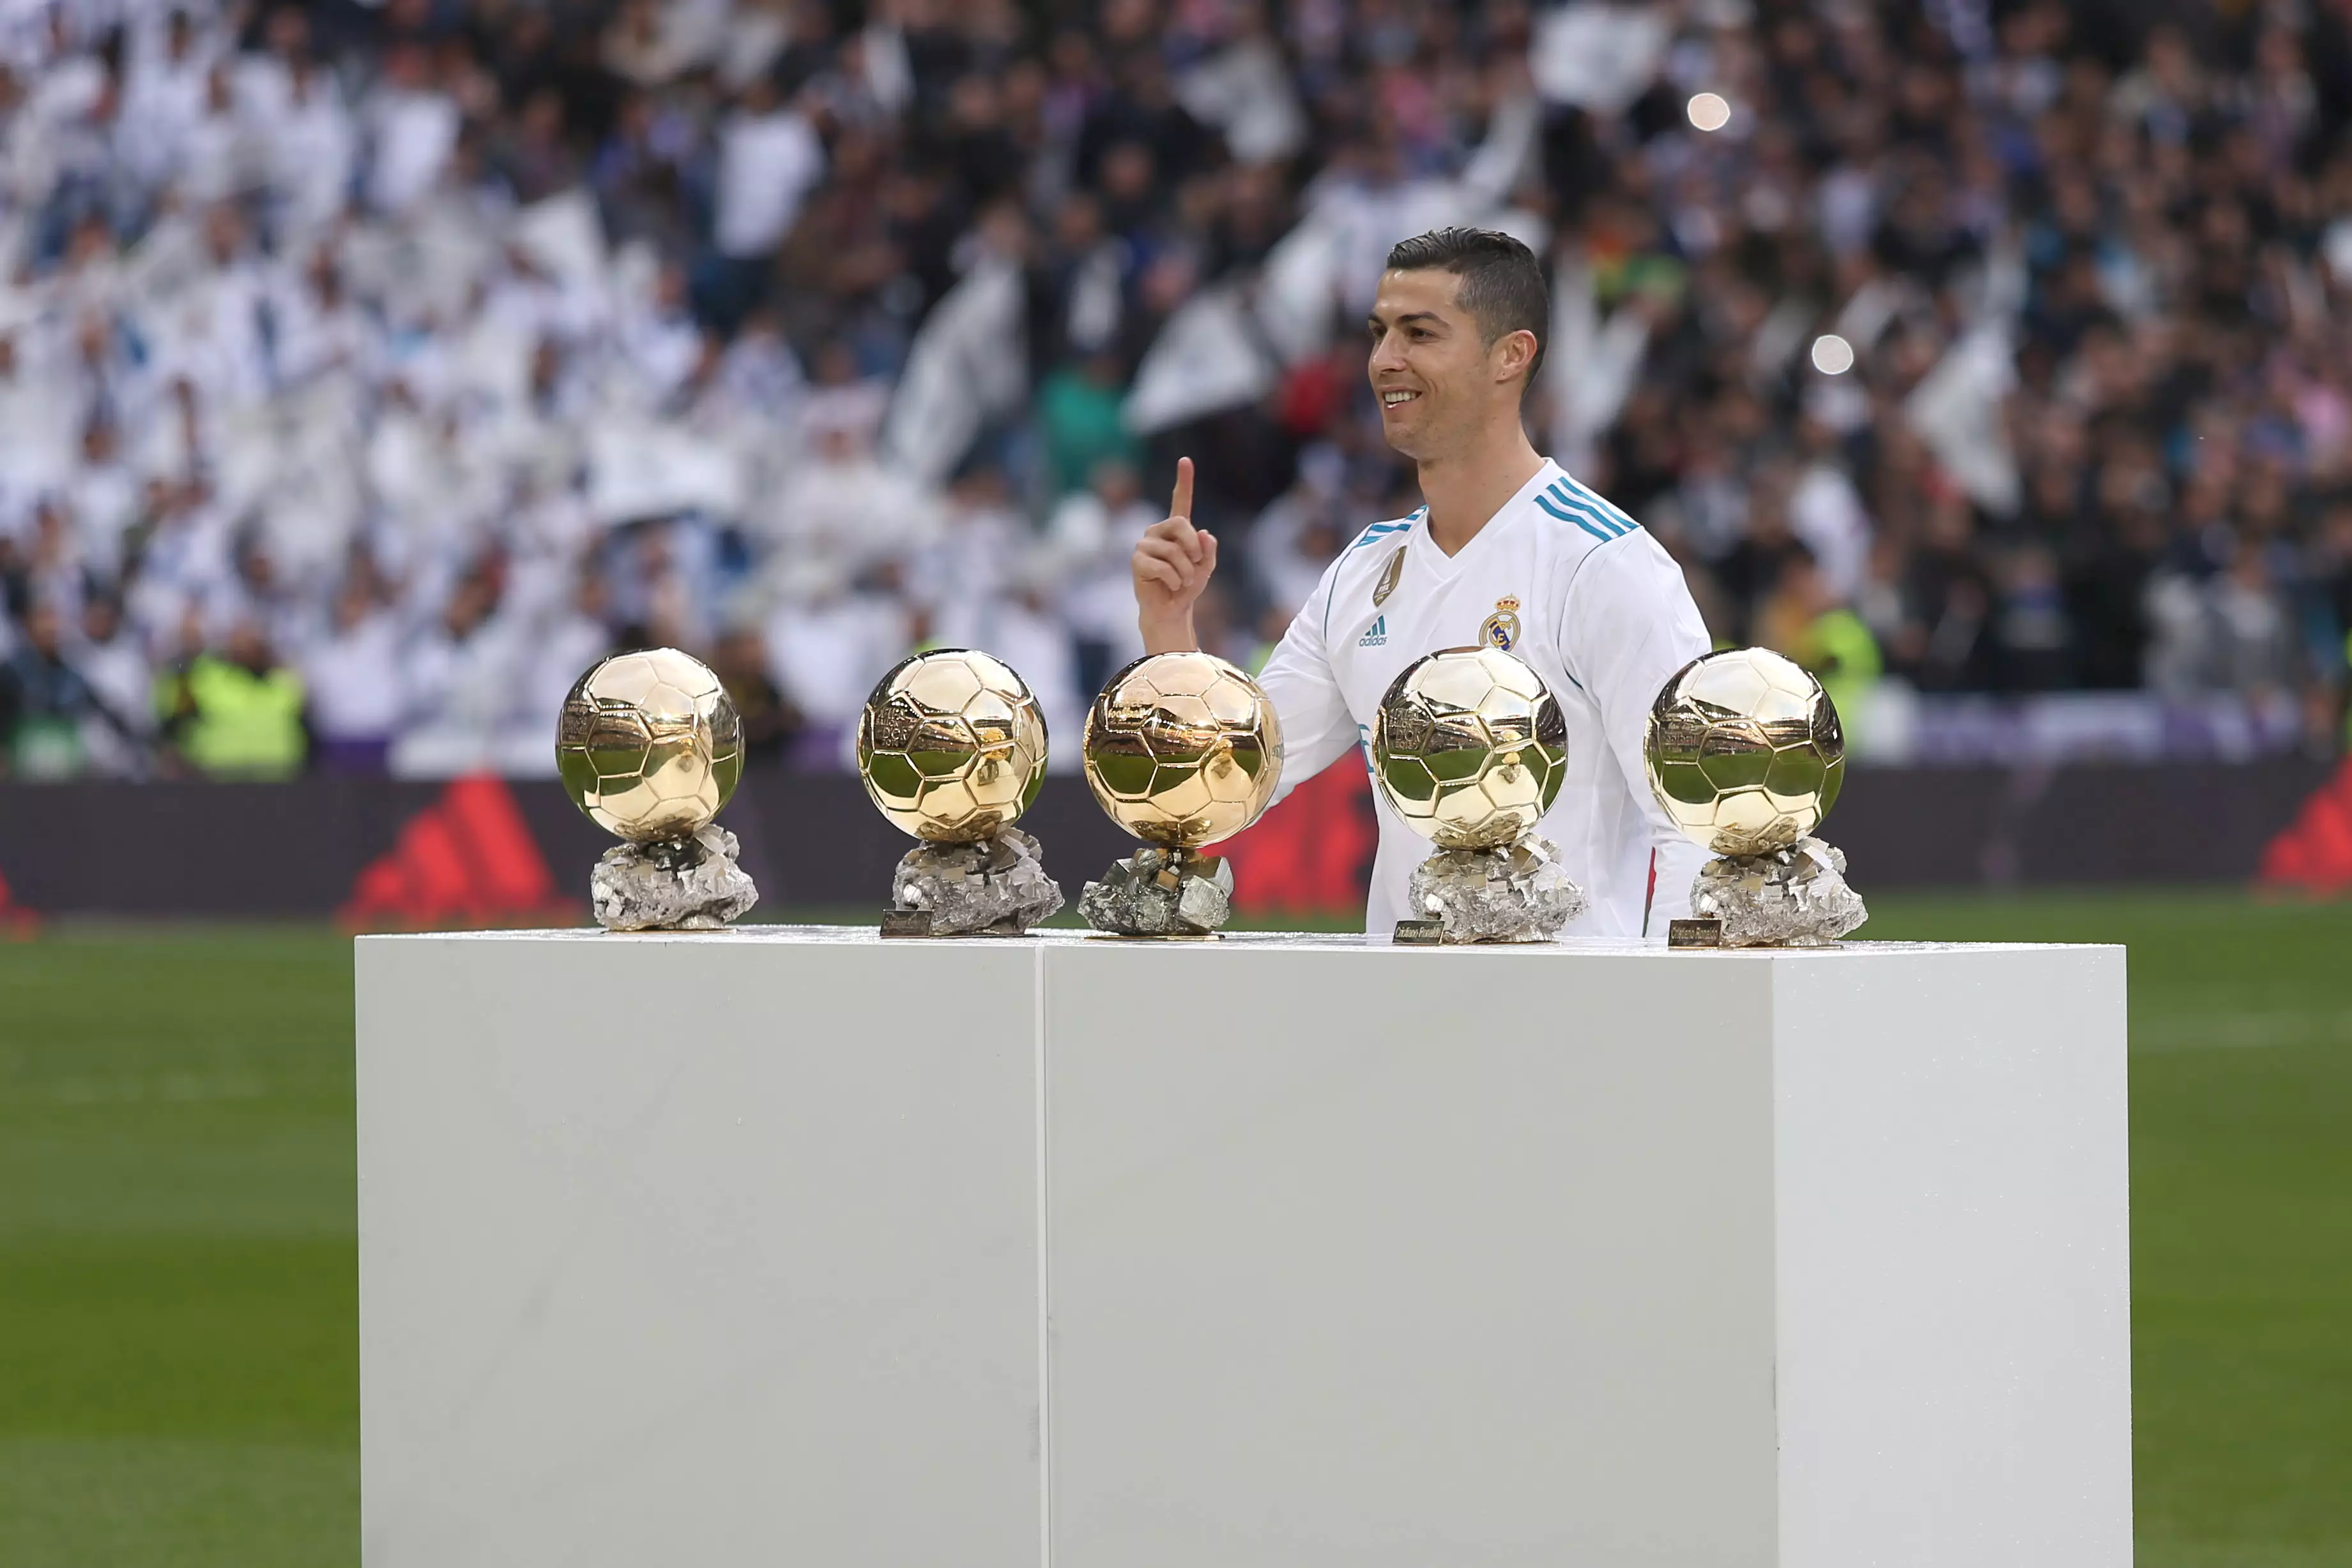 Cristiano shows off his five awards. Image: PA Images